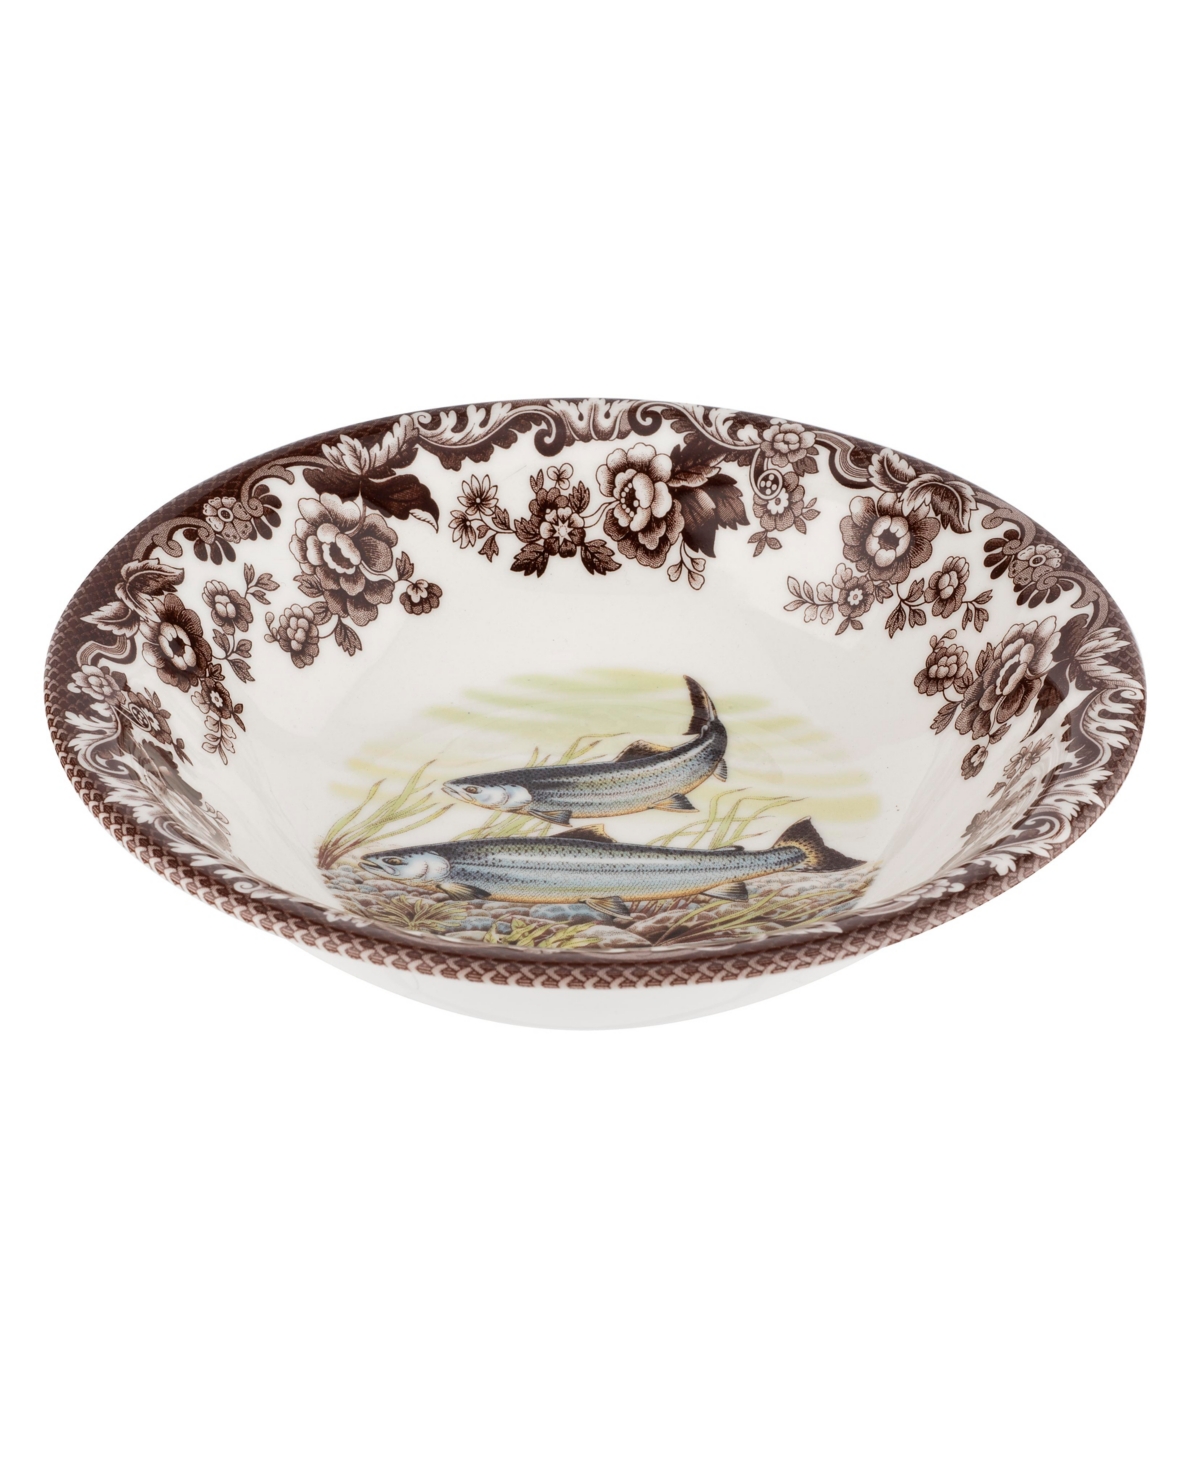 Woodland King Salmon Ascot Cereal Bowl - Brown